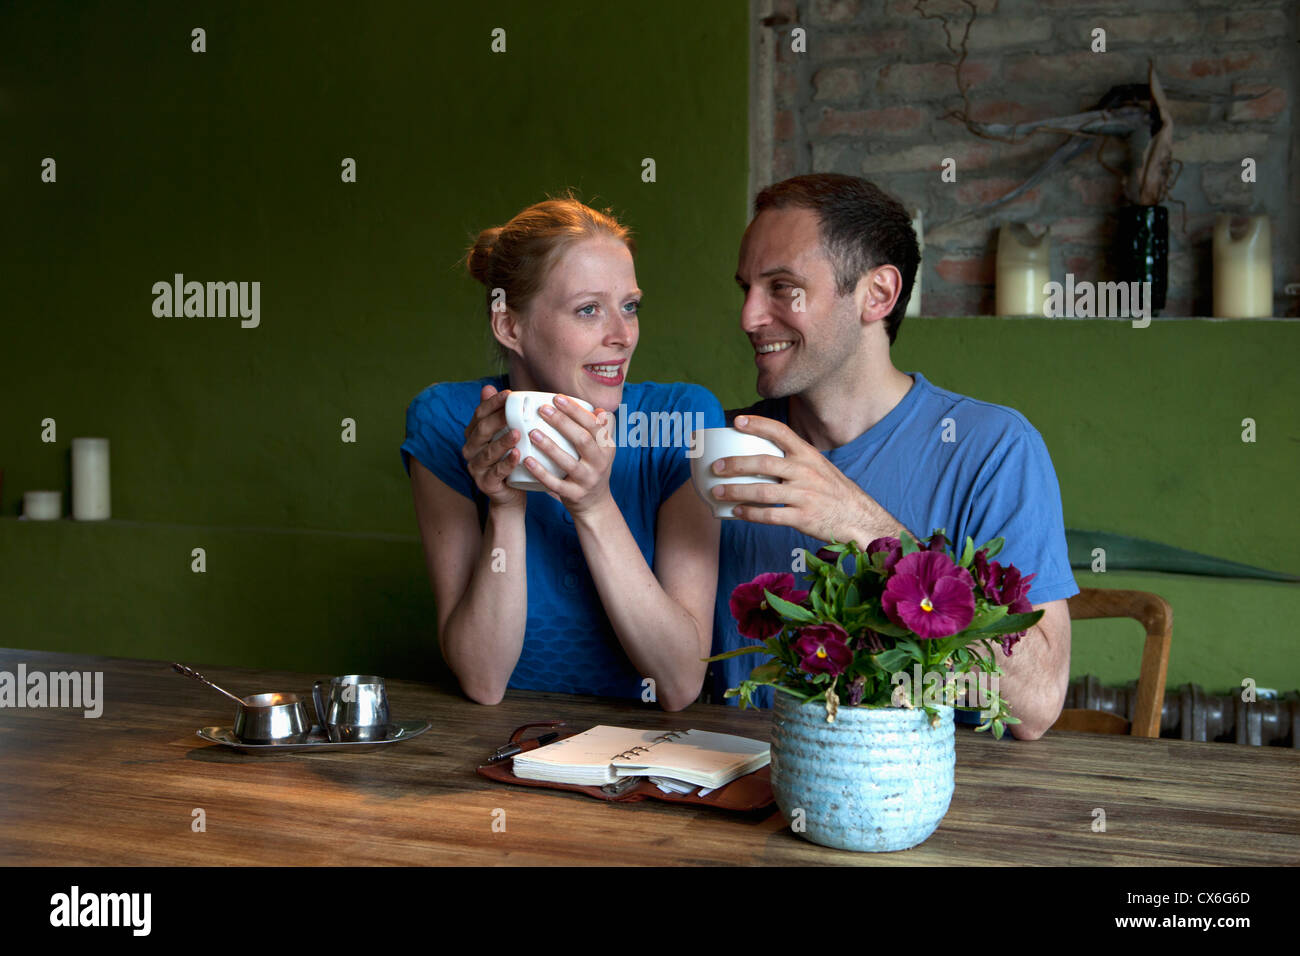 A couple sitting at a dining table with a personal organizer, talking over coffee Stock Photo